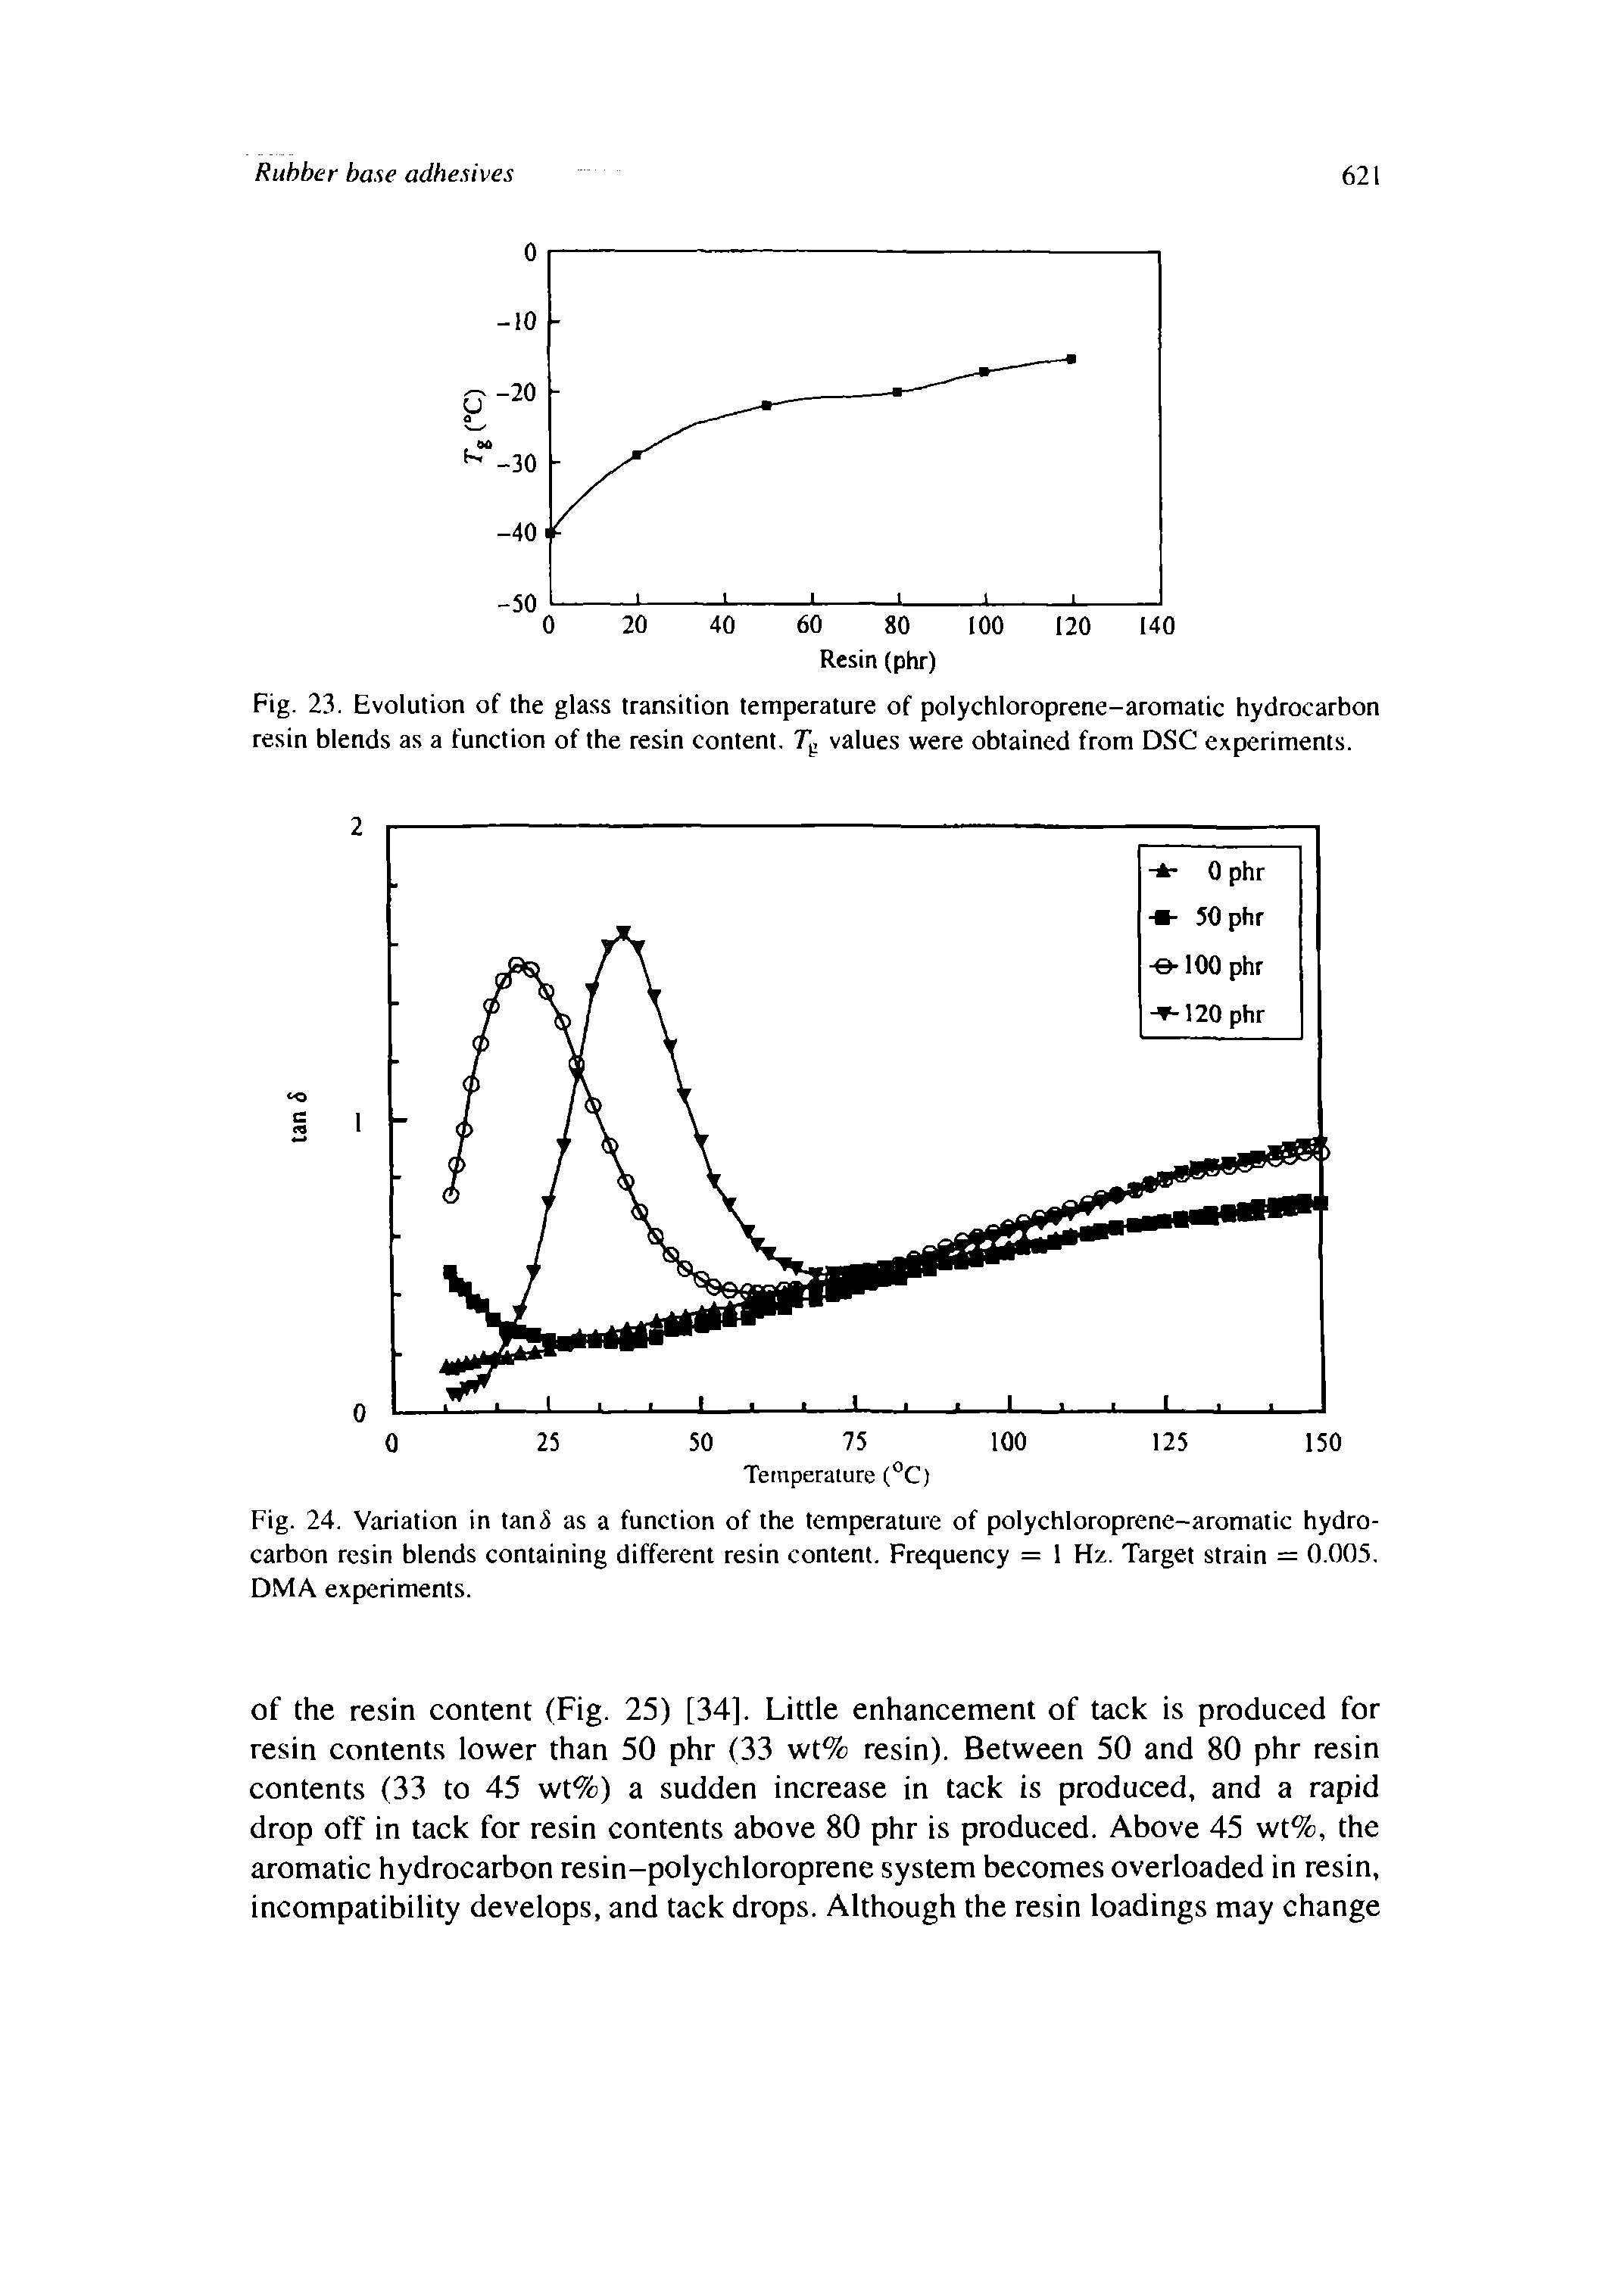 Fig. 23. Evolution of the glass transition temperature of polychloroprene-aromatic hydrocarbon resin blends as a function of the resin content. values were obtained from DSC experiments.